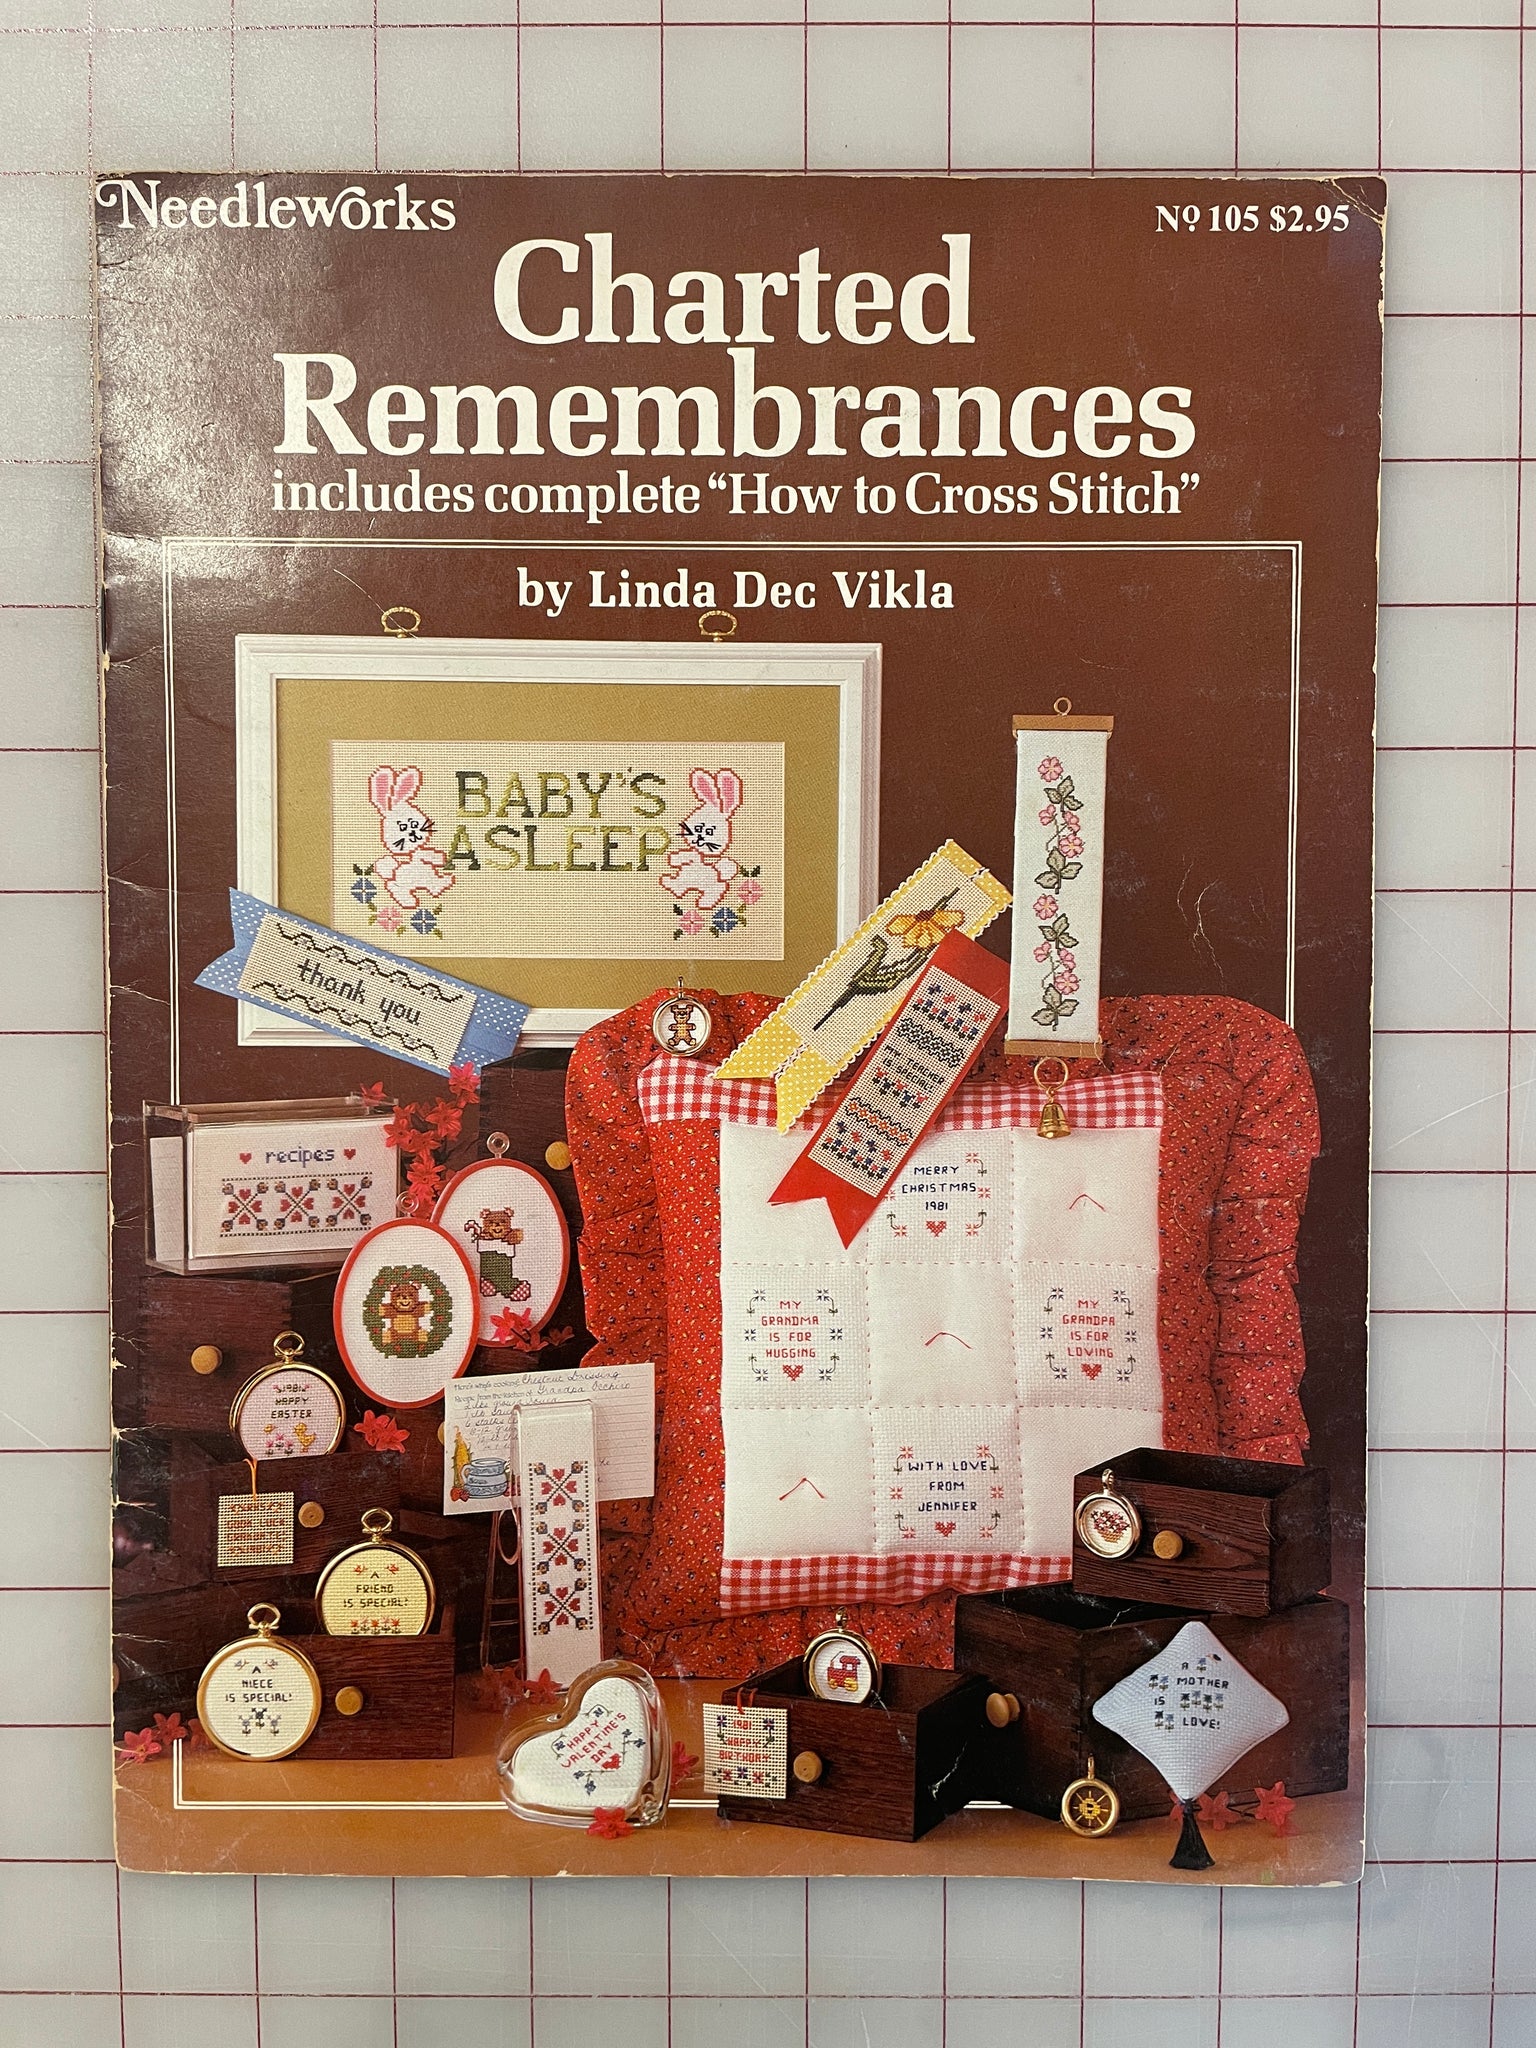 SALE 1981 Counted Cross Stitch Leaflet - "Charted Remembrances"